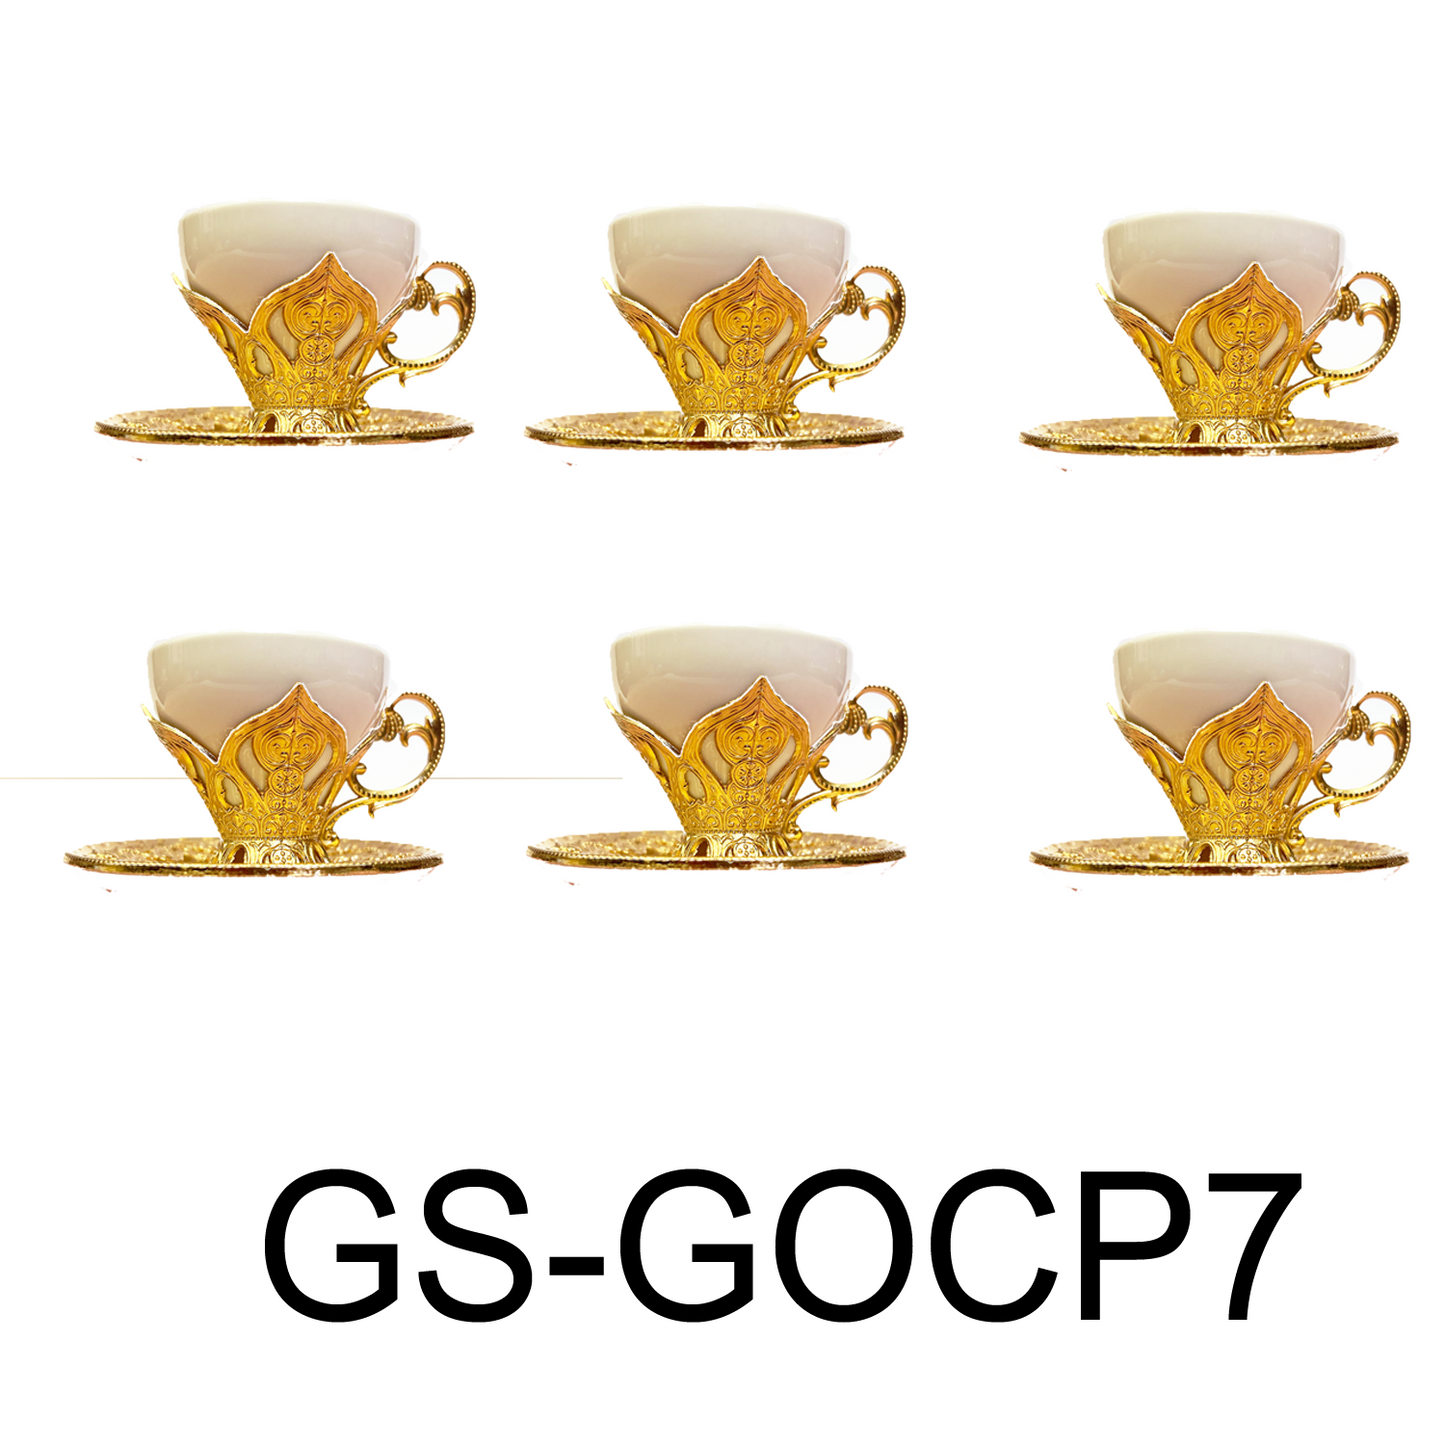 12 PC White & Gold Fancy Coffee Cup Set